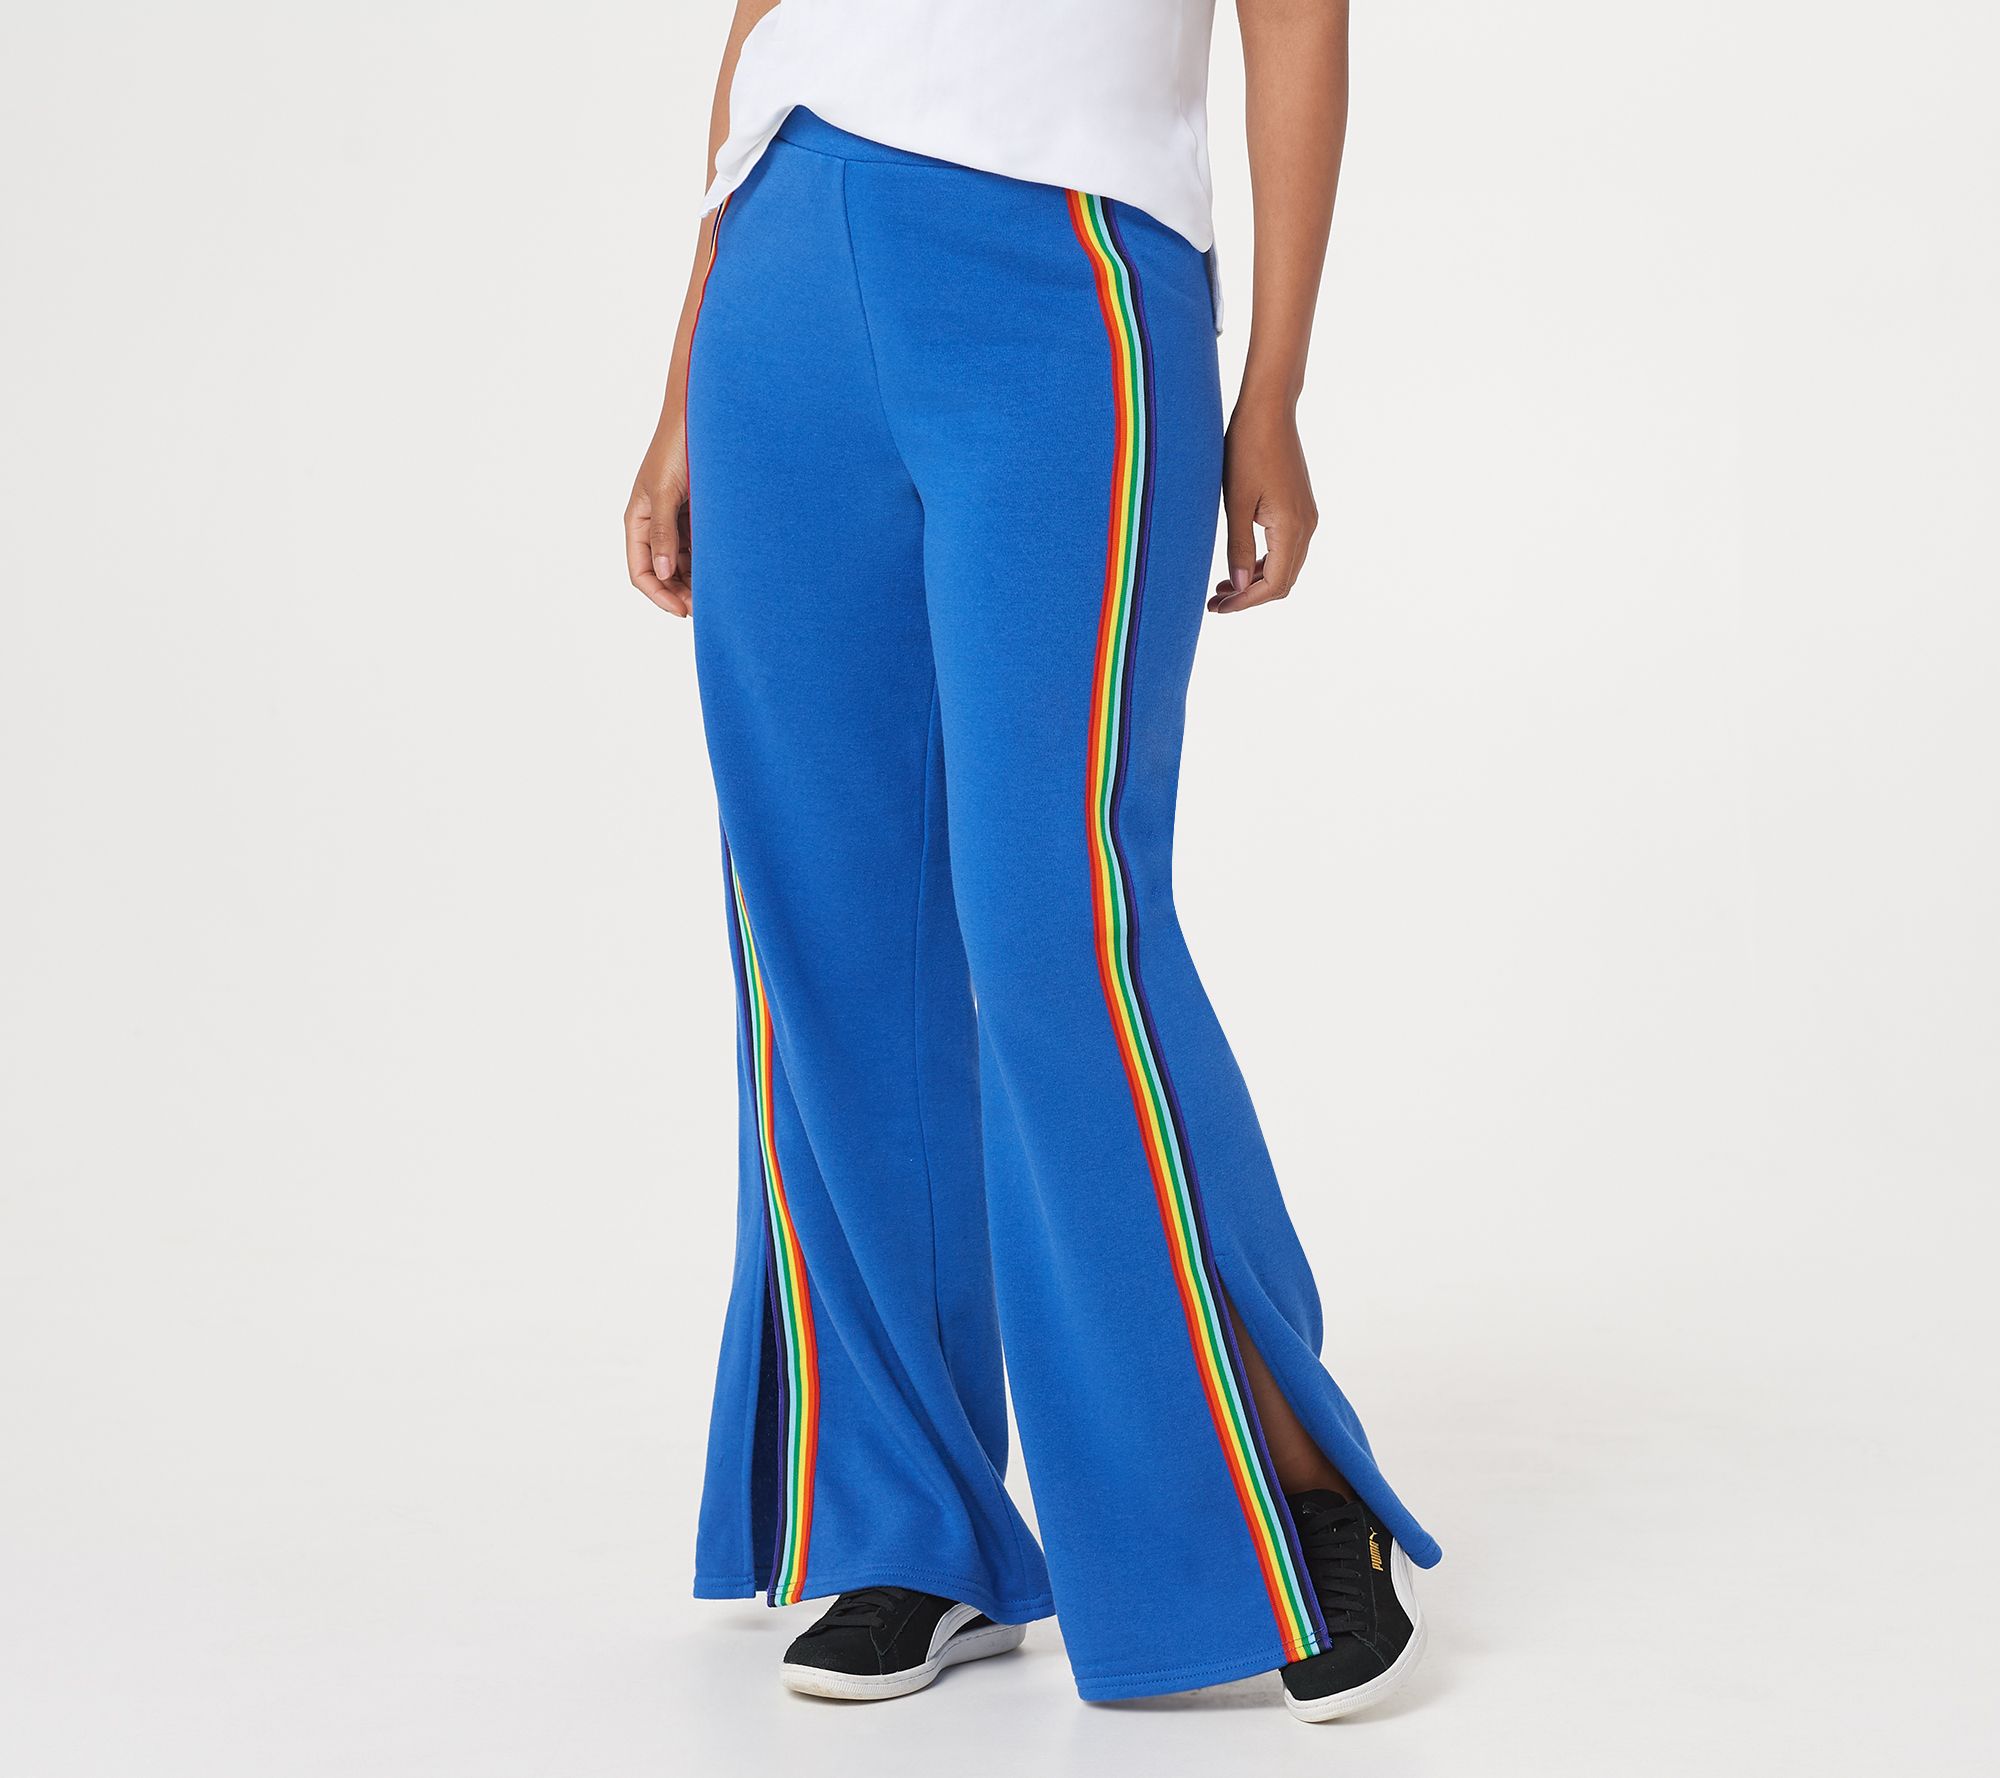 Tracy Anderson for G.I.L.I. Regular French Terry Pants - QVC.com